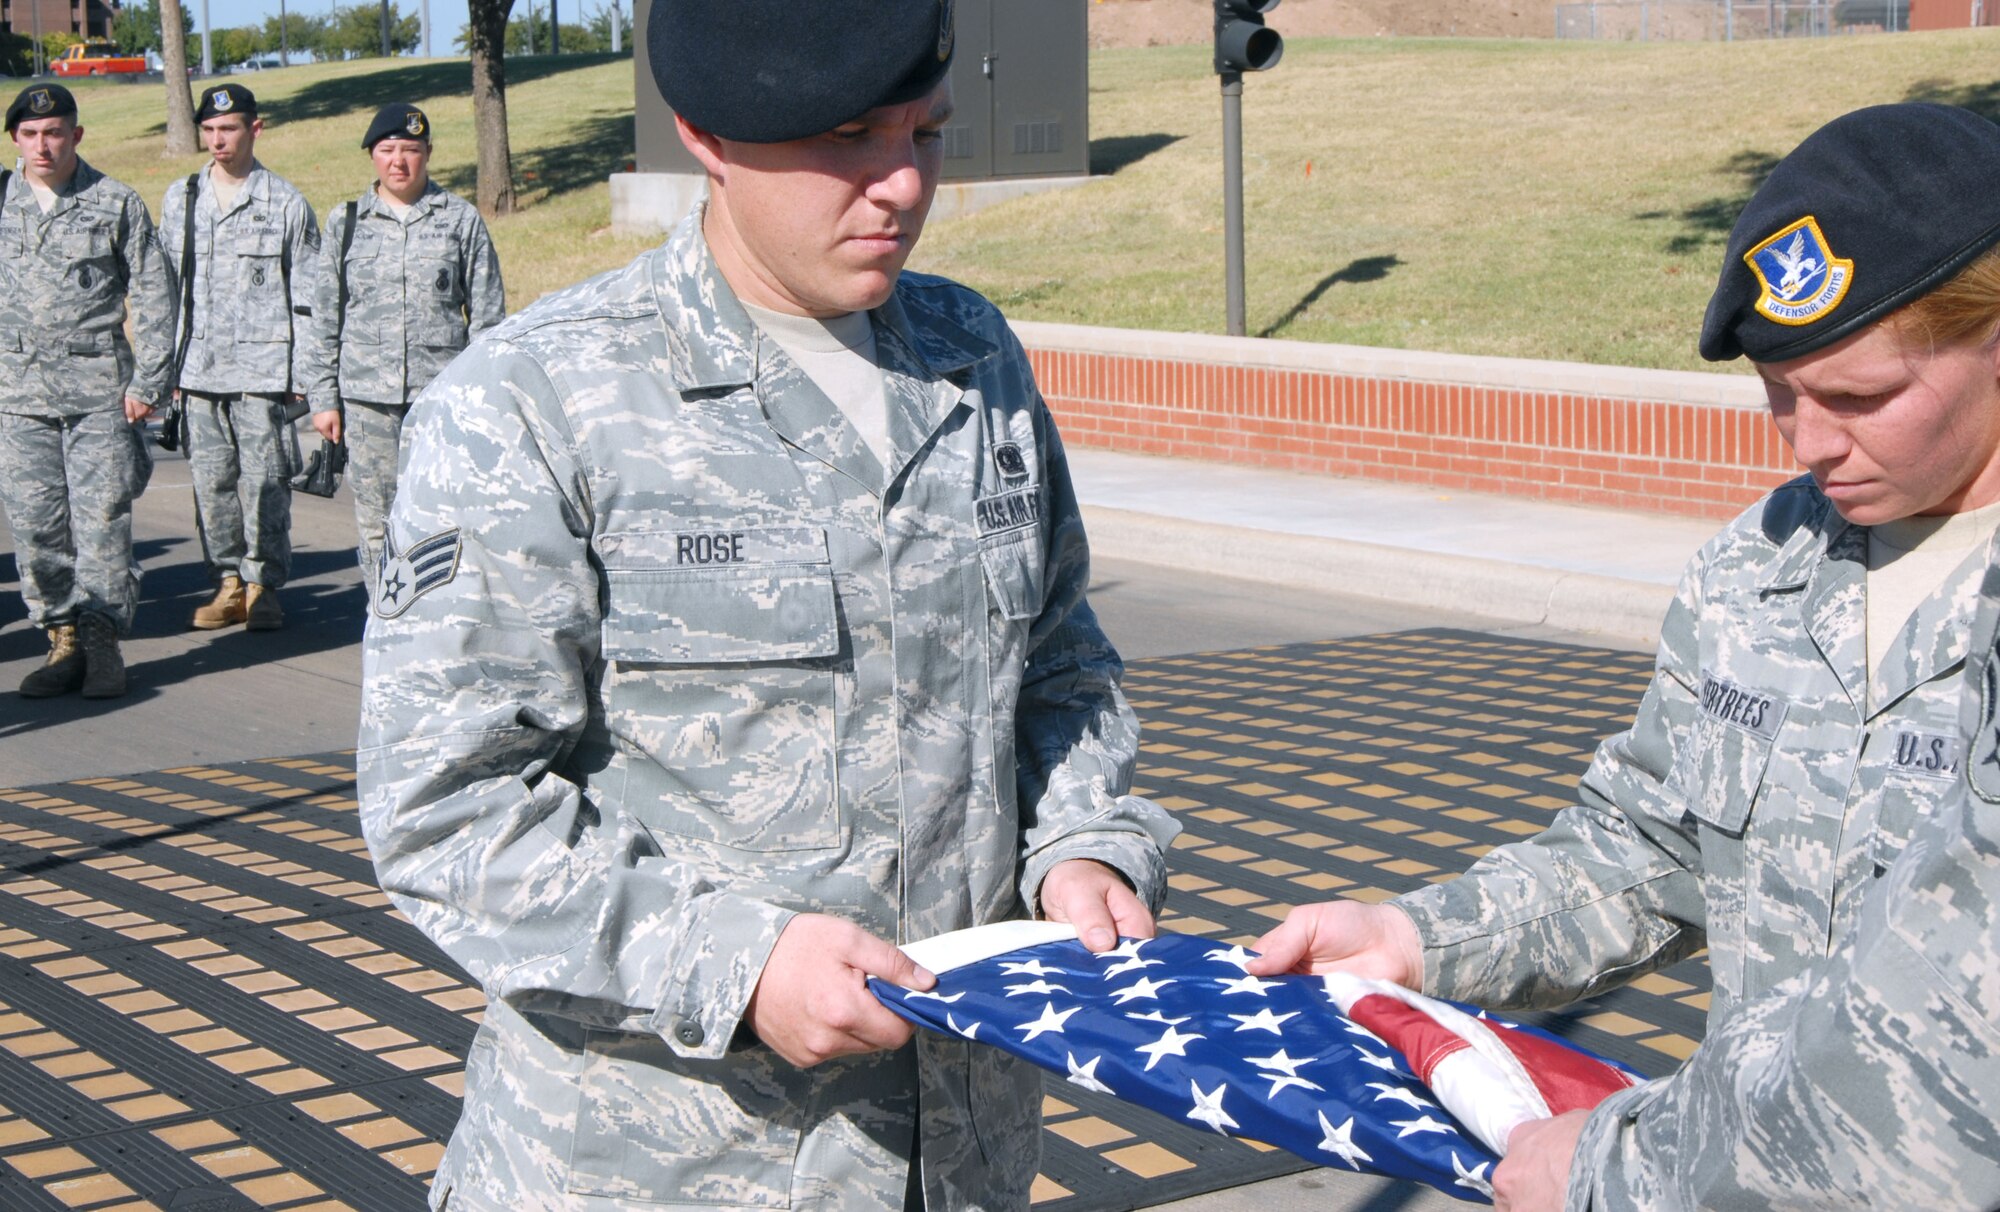 GOODFELLOW AIR FORCE BASE, Texas -- 17th Security Forces Squadron members, Senior Airman Mikael Rose and Staff Sgt. DeAndra Vertrees assist in folding a flag Sept 28, during a ceremony commemorating the 5th anniversary of Airman 1st Class Elizabeth N. Jacobson's death. Airman Jacobson was the first Security Forces member and the first Air Force female to be killed in action in Iraq. (U.S. Air Force photo/Airman 1st Class Jessica D. Keith)